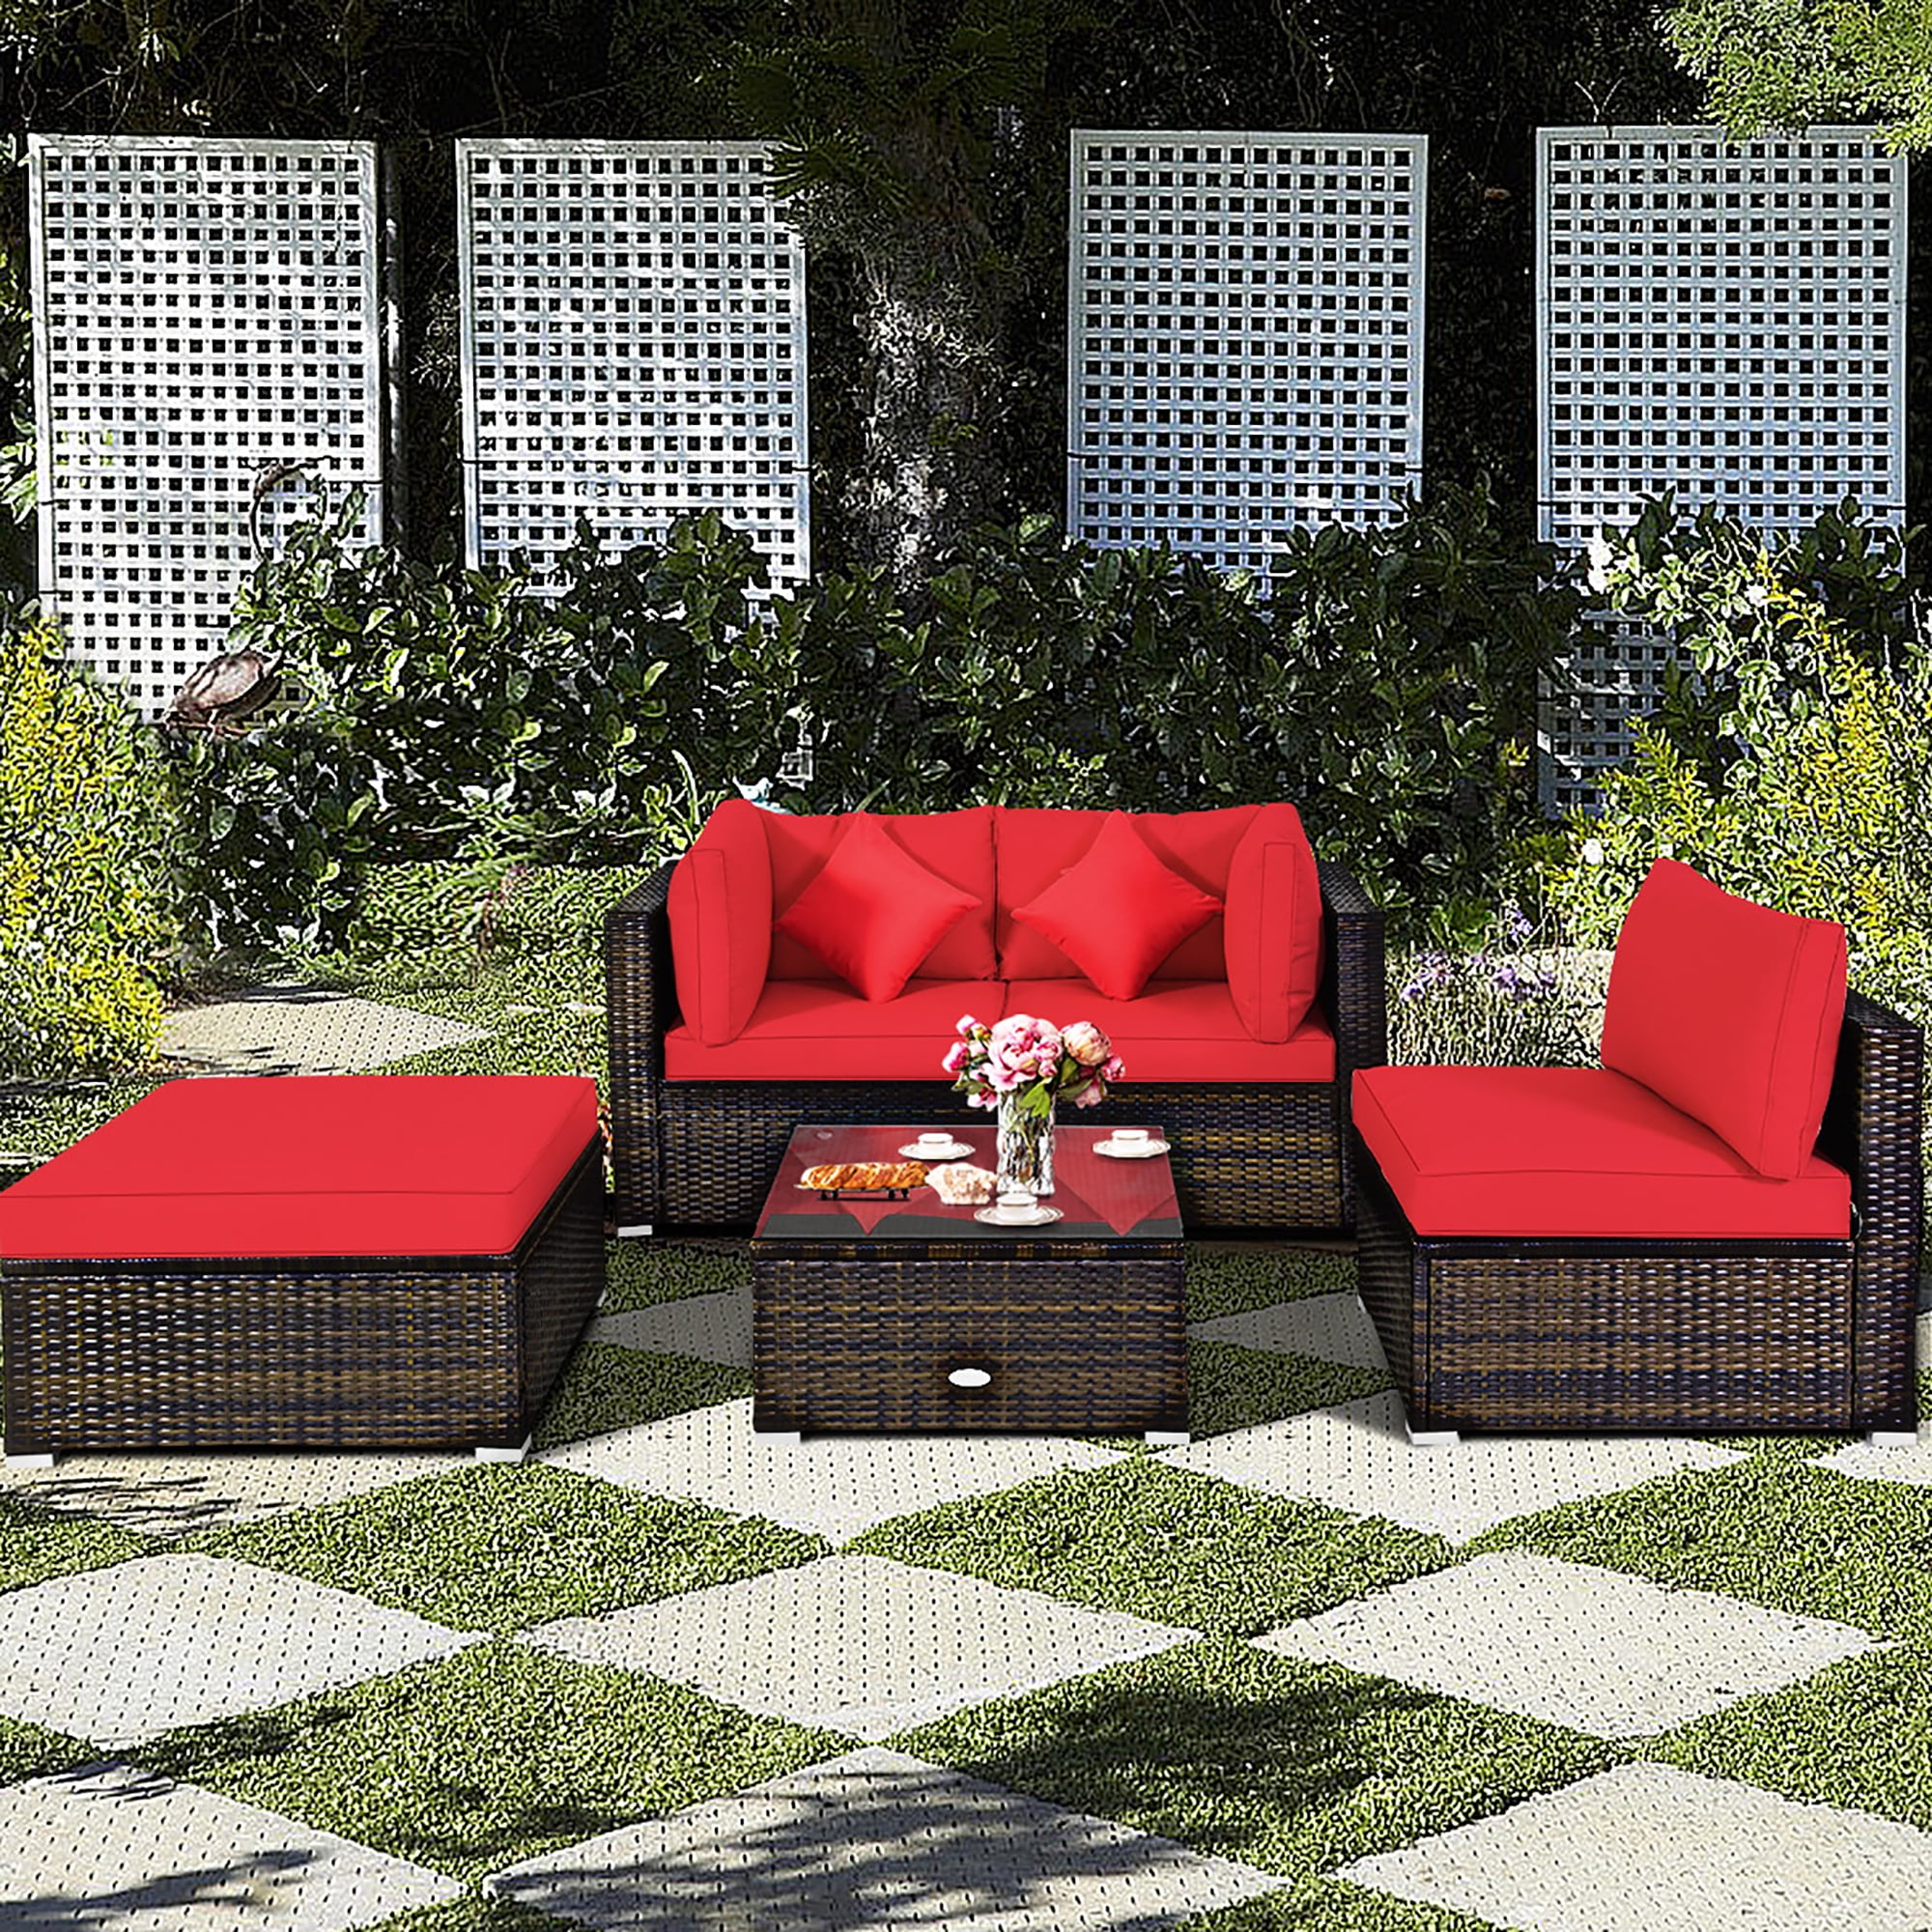 Costway 5pcs Outdoor Patio Rattan, Patio Furniture Sets Red Cushions